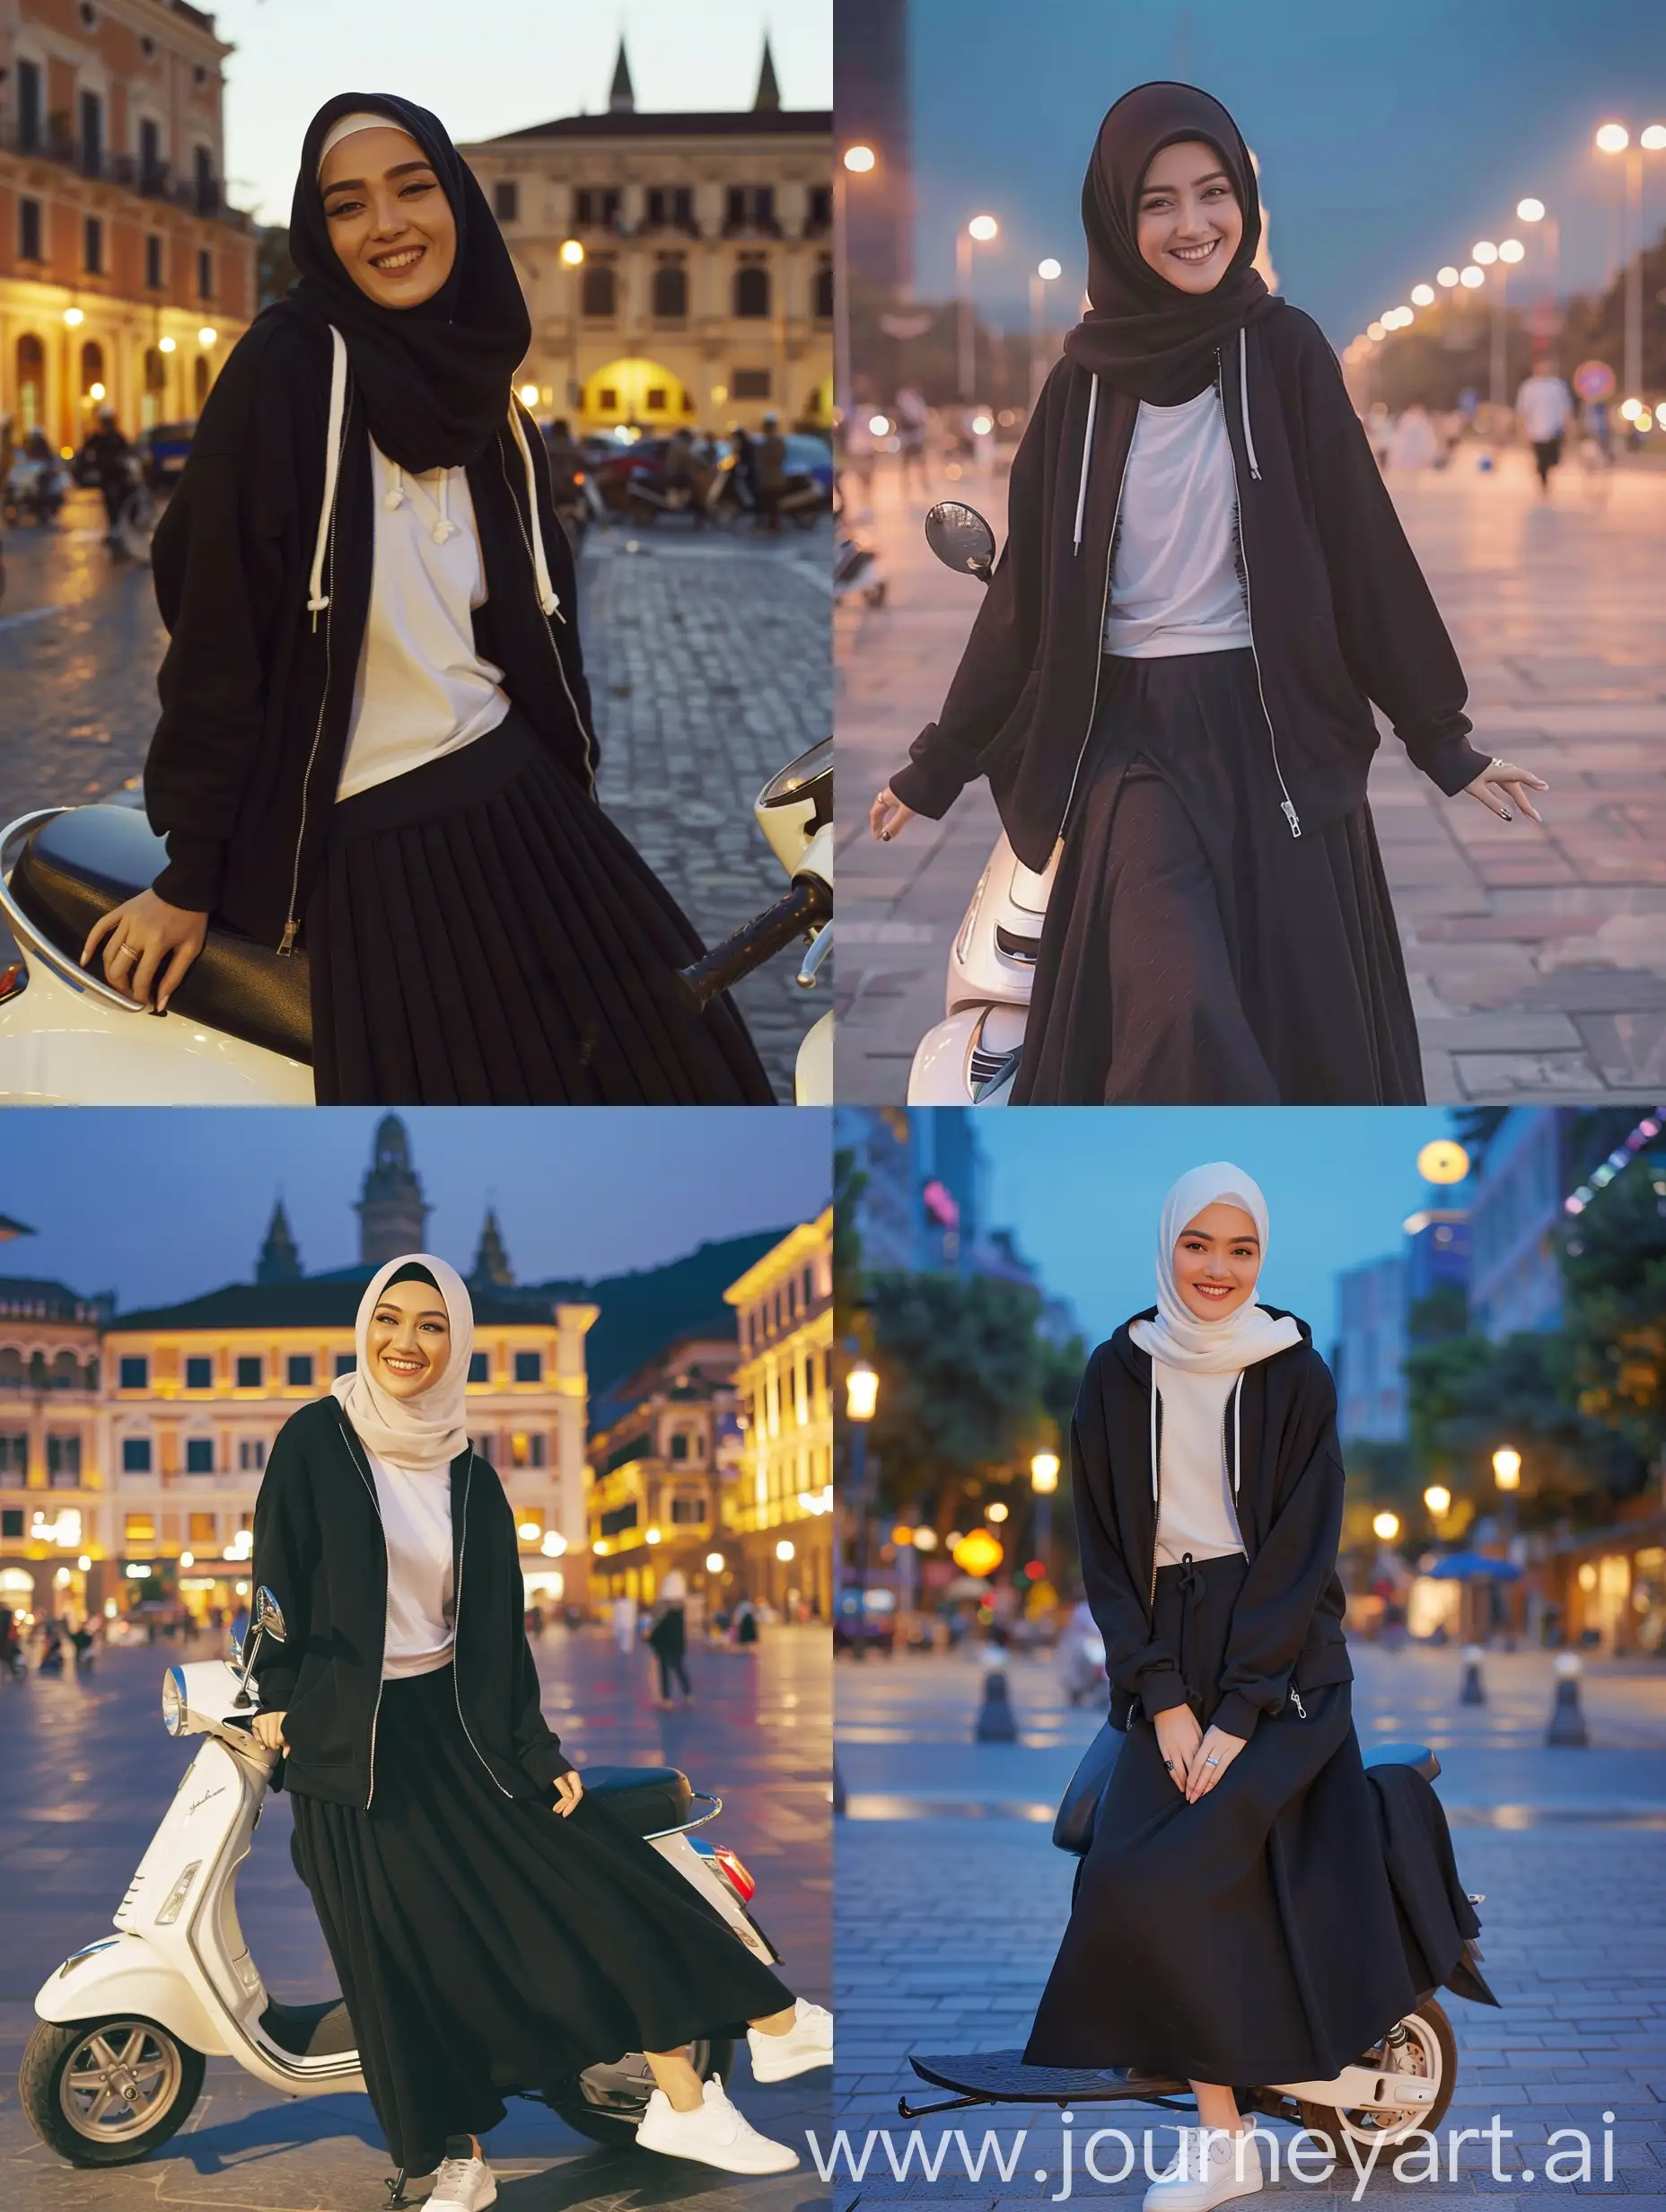 Young-Indonesian-Woman-in-Urban-Setting-Poses-on-Scooter-at-City-Square